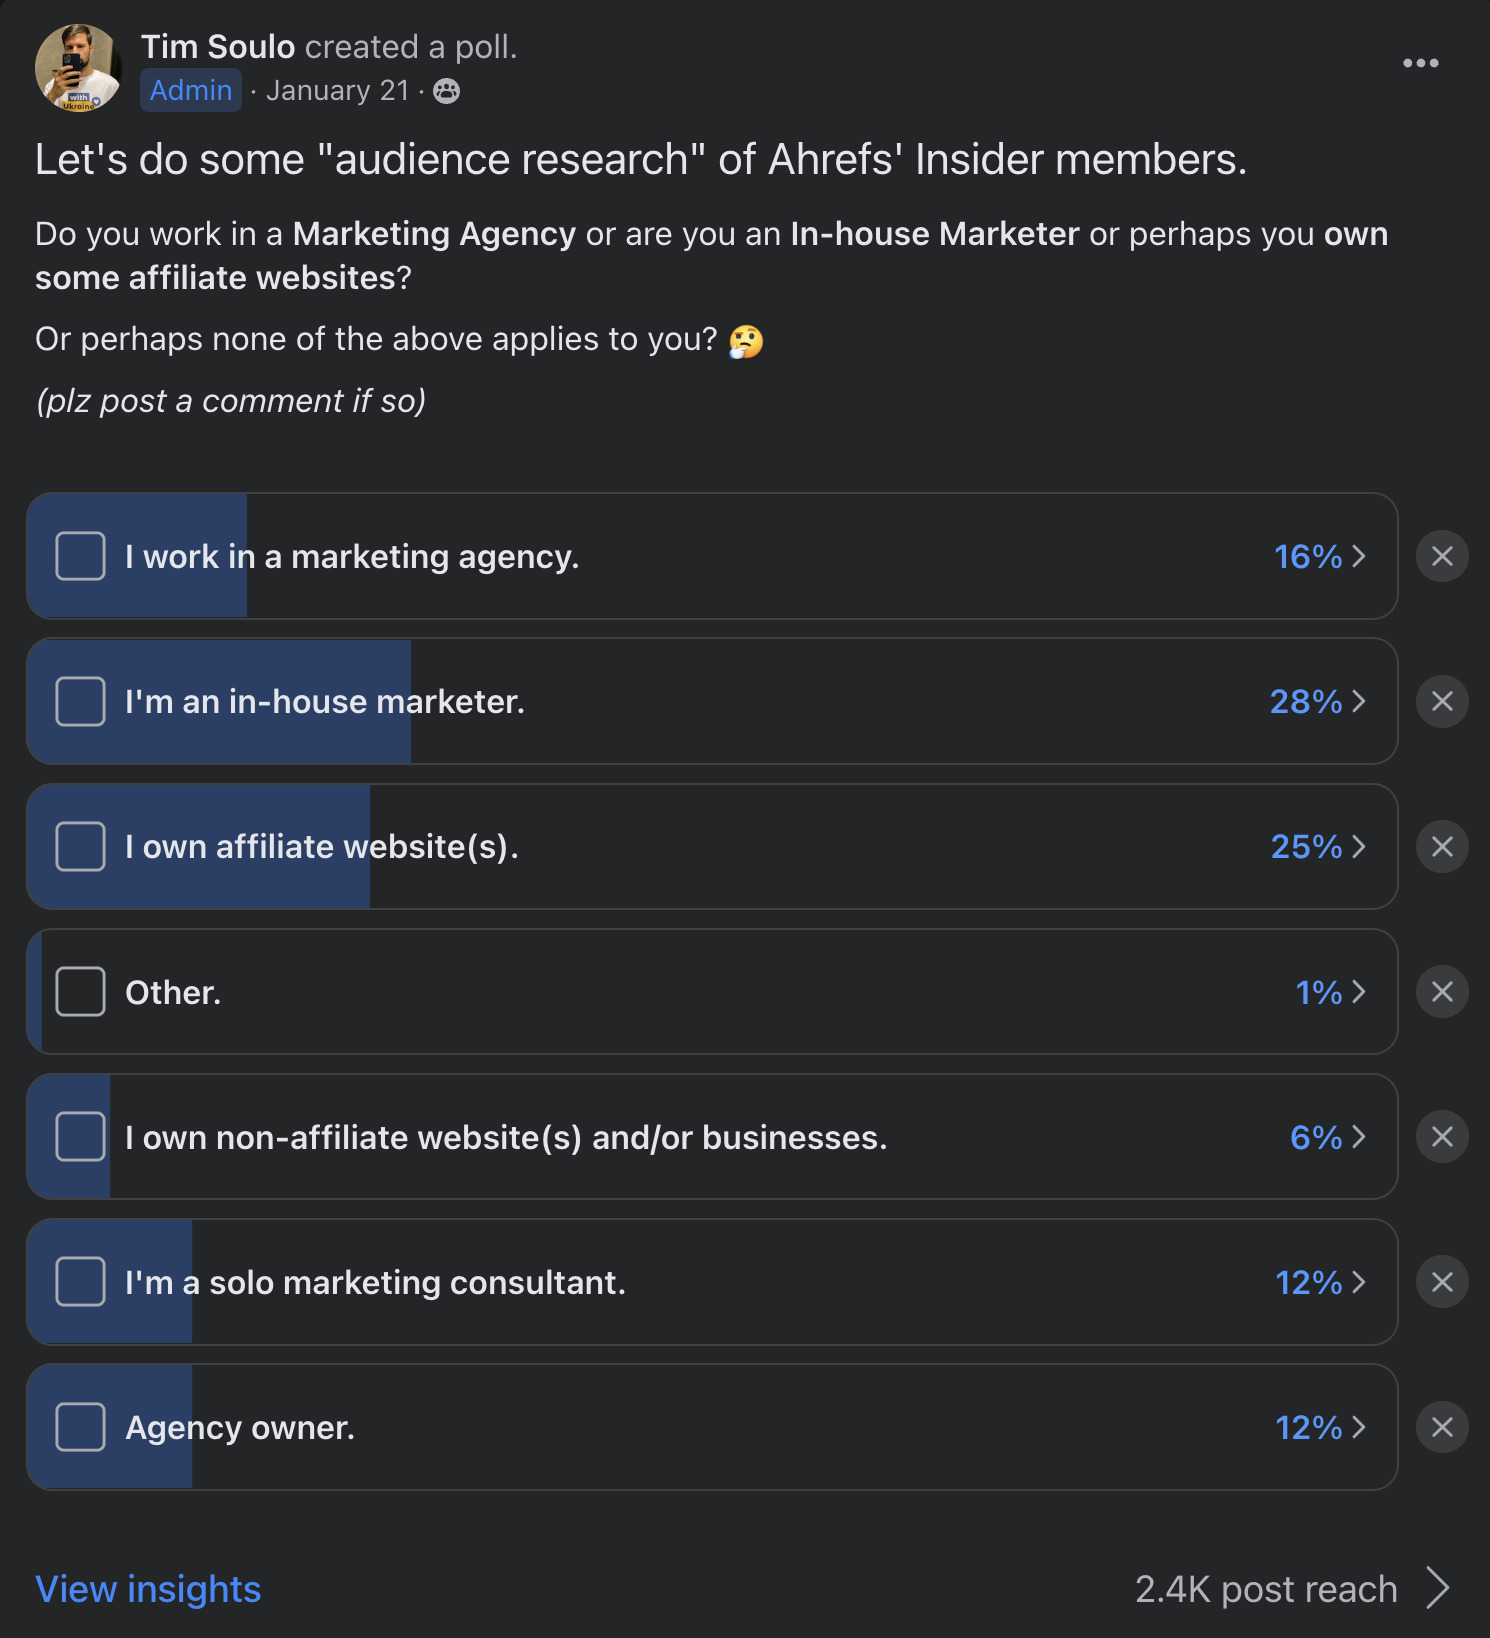 Audience research for Ahrefs Insider's members, via Facebook